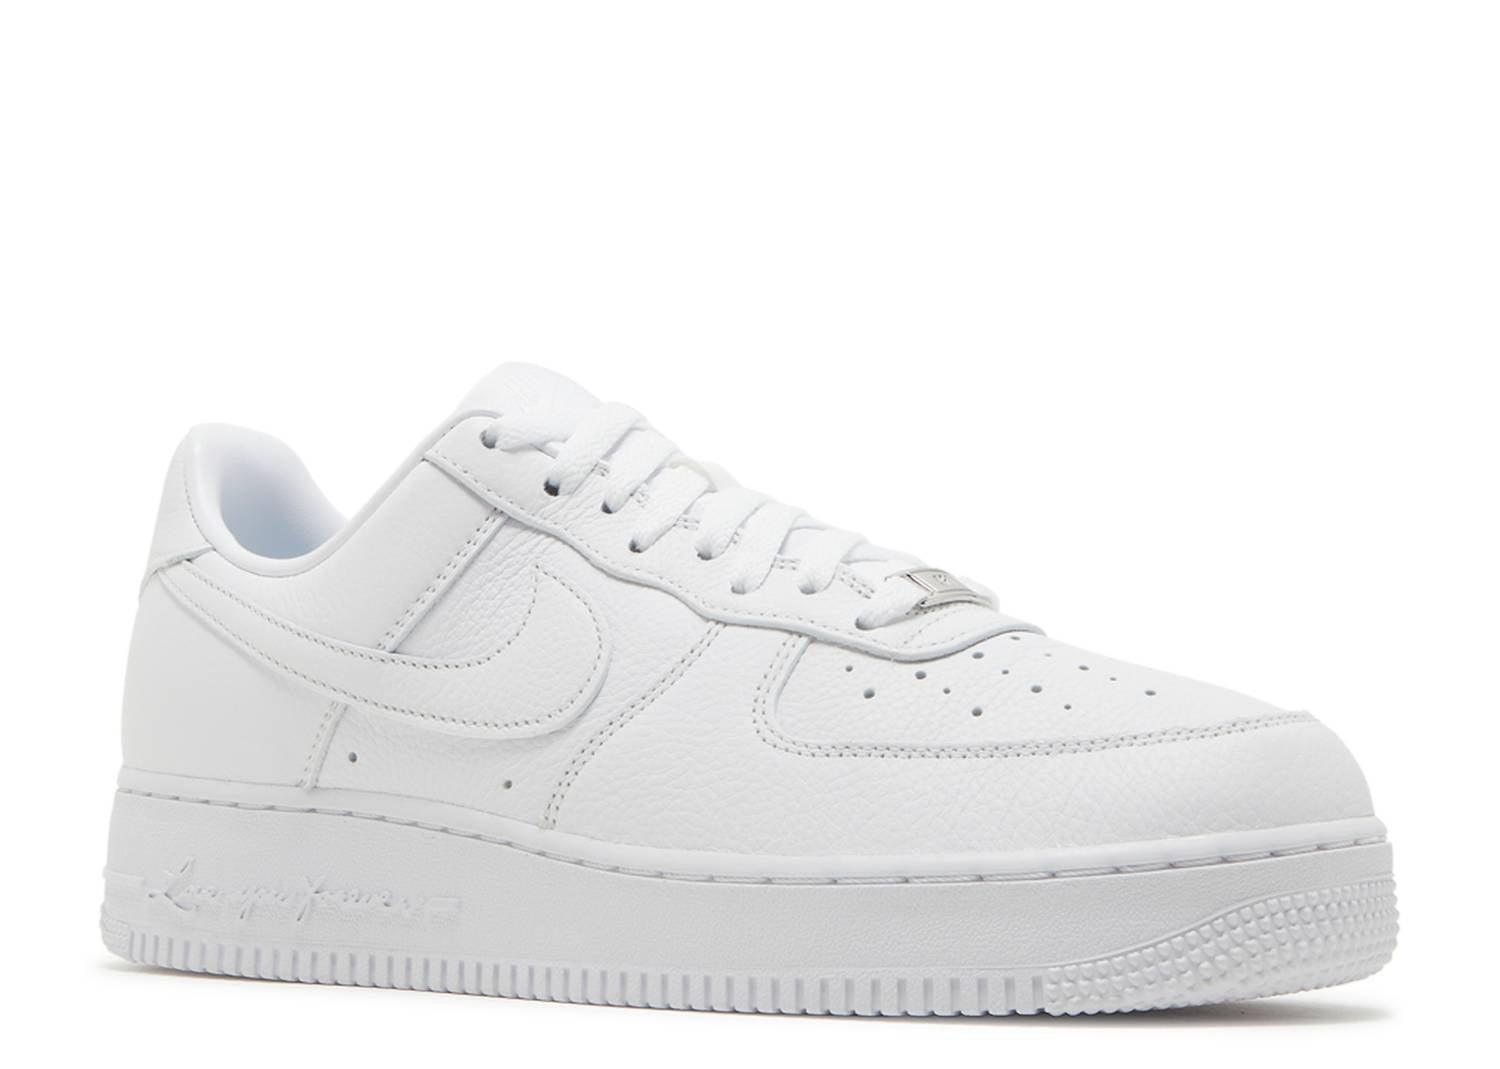 NOCTA X NIKE AIR FORCE 1 LOW “CERTIFIED LOVER BOY” - ENDLESS